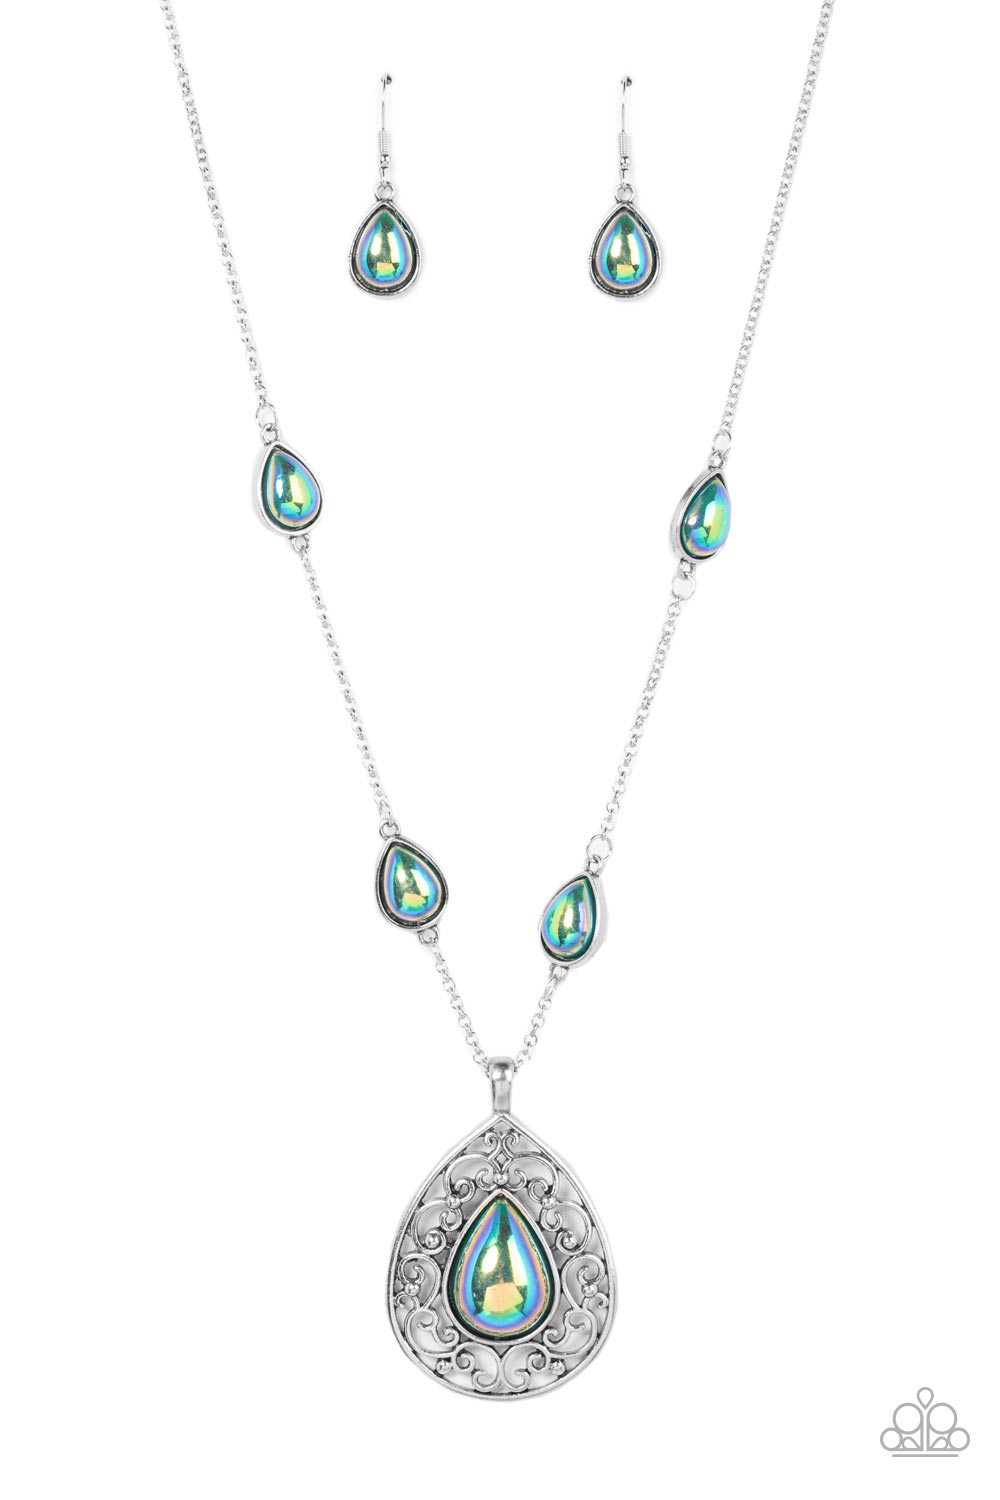 Magical Masquerade - Green Iridescent Teardrop Bead/Oversized Silver Pendant Paparazzi Necklace & matching earrings